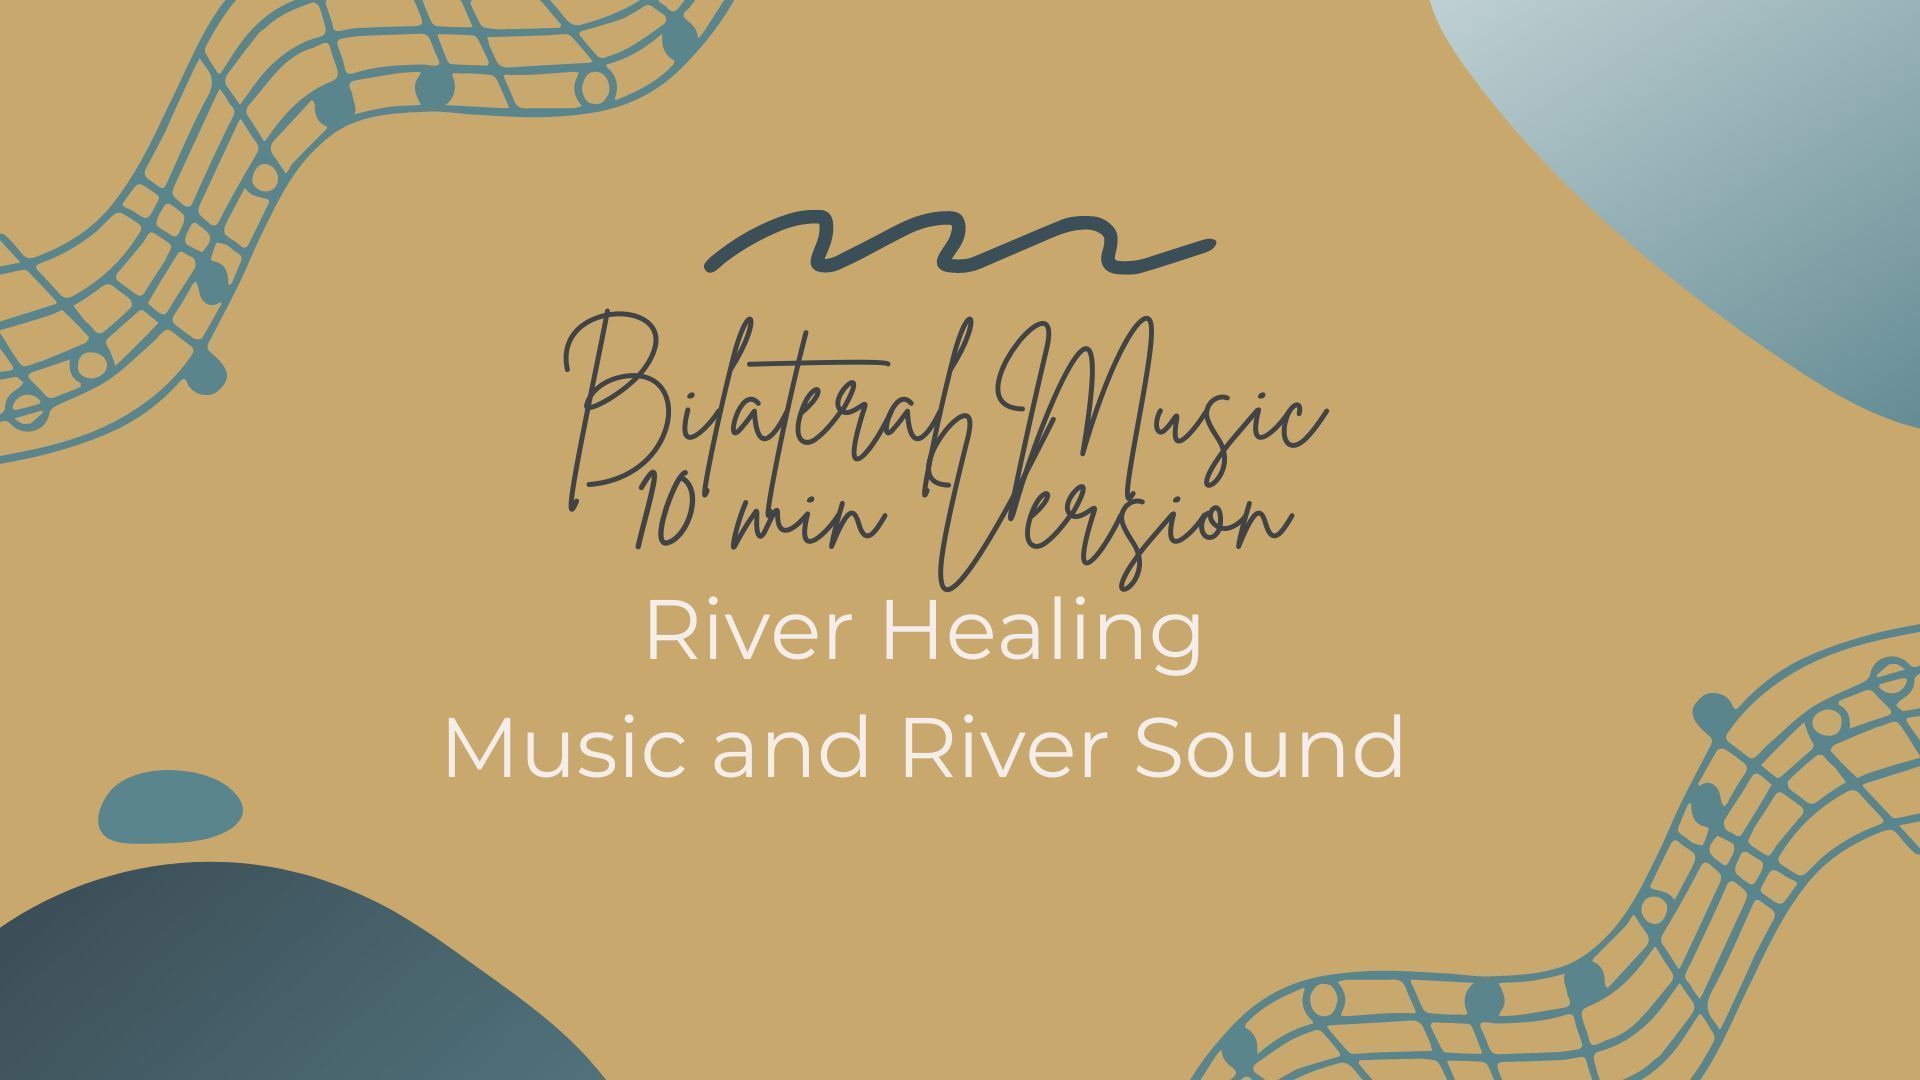 a poster for river healing music and river bilateral music .